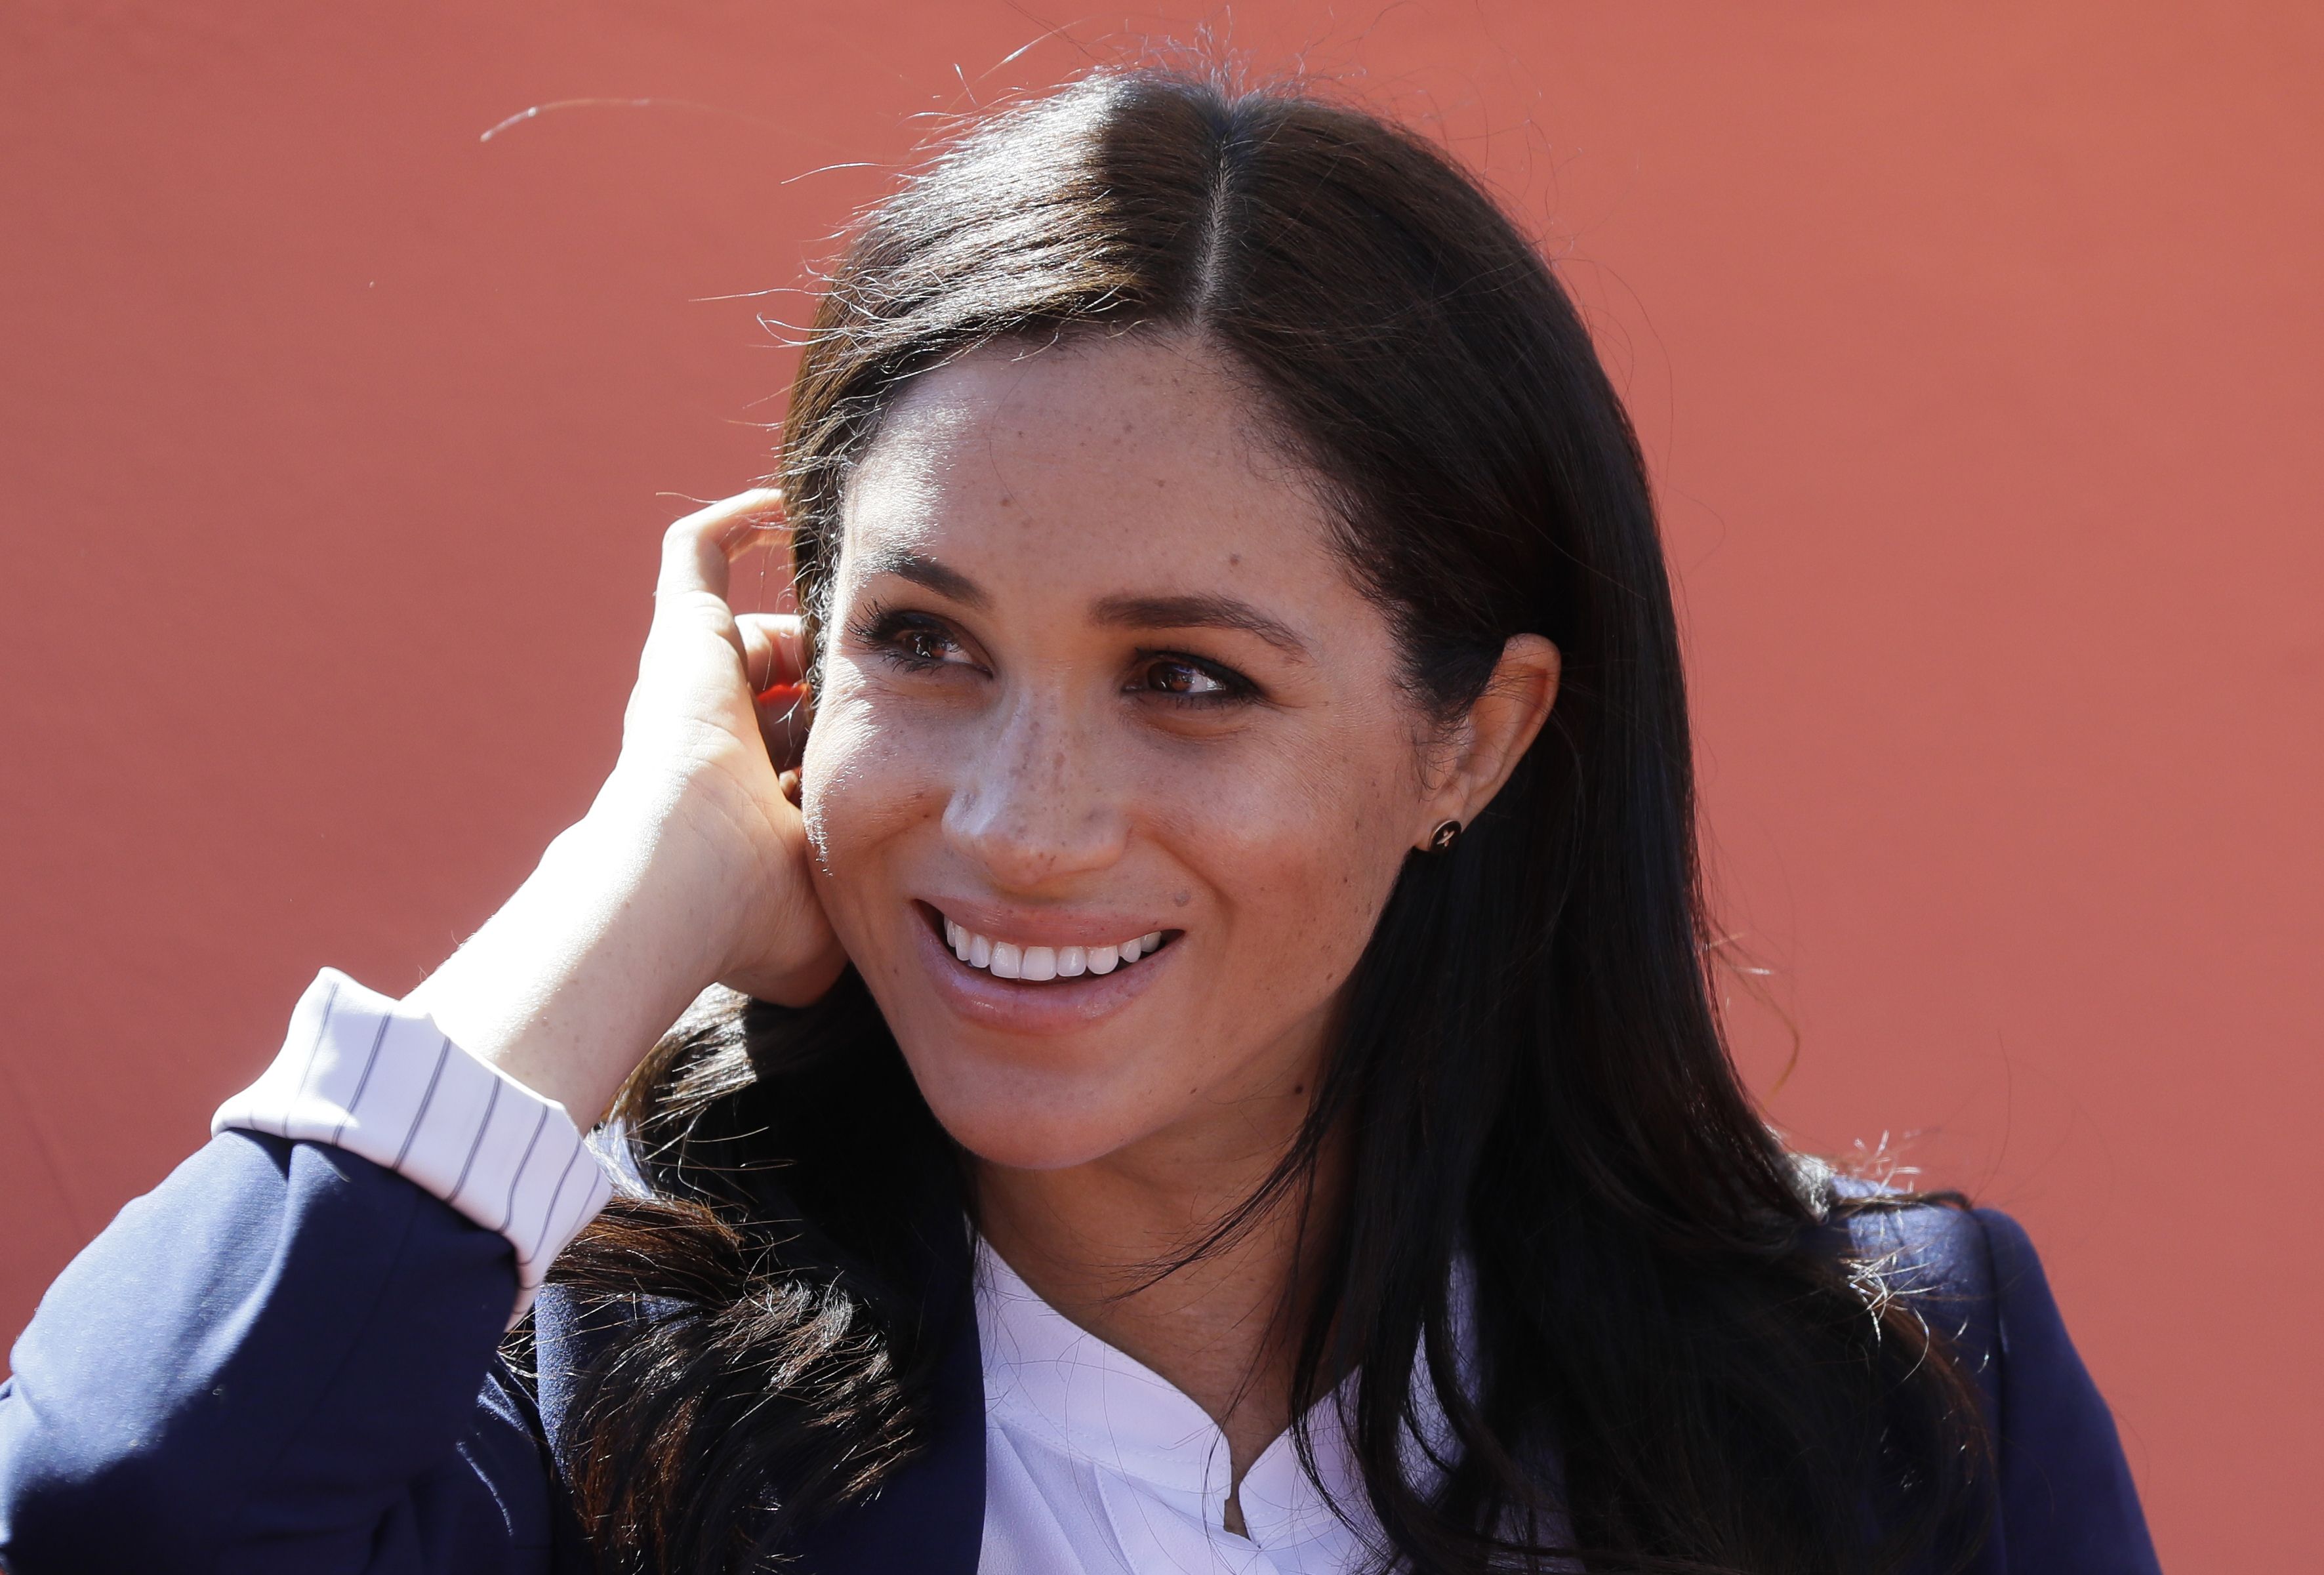 Meghan Markle 'Spoke Spanish Perfectly' During Her Homeboy Industries Visit